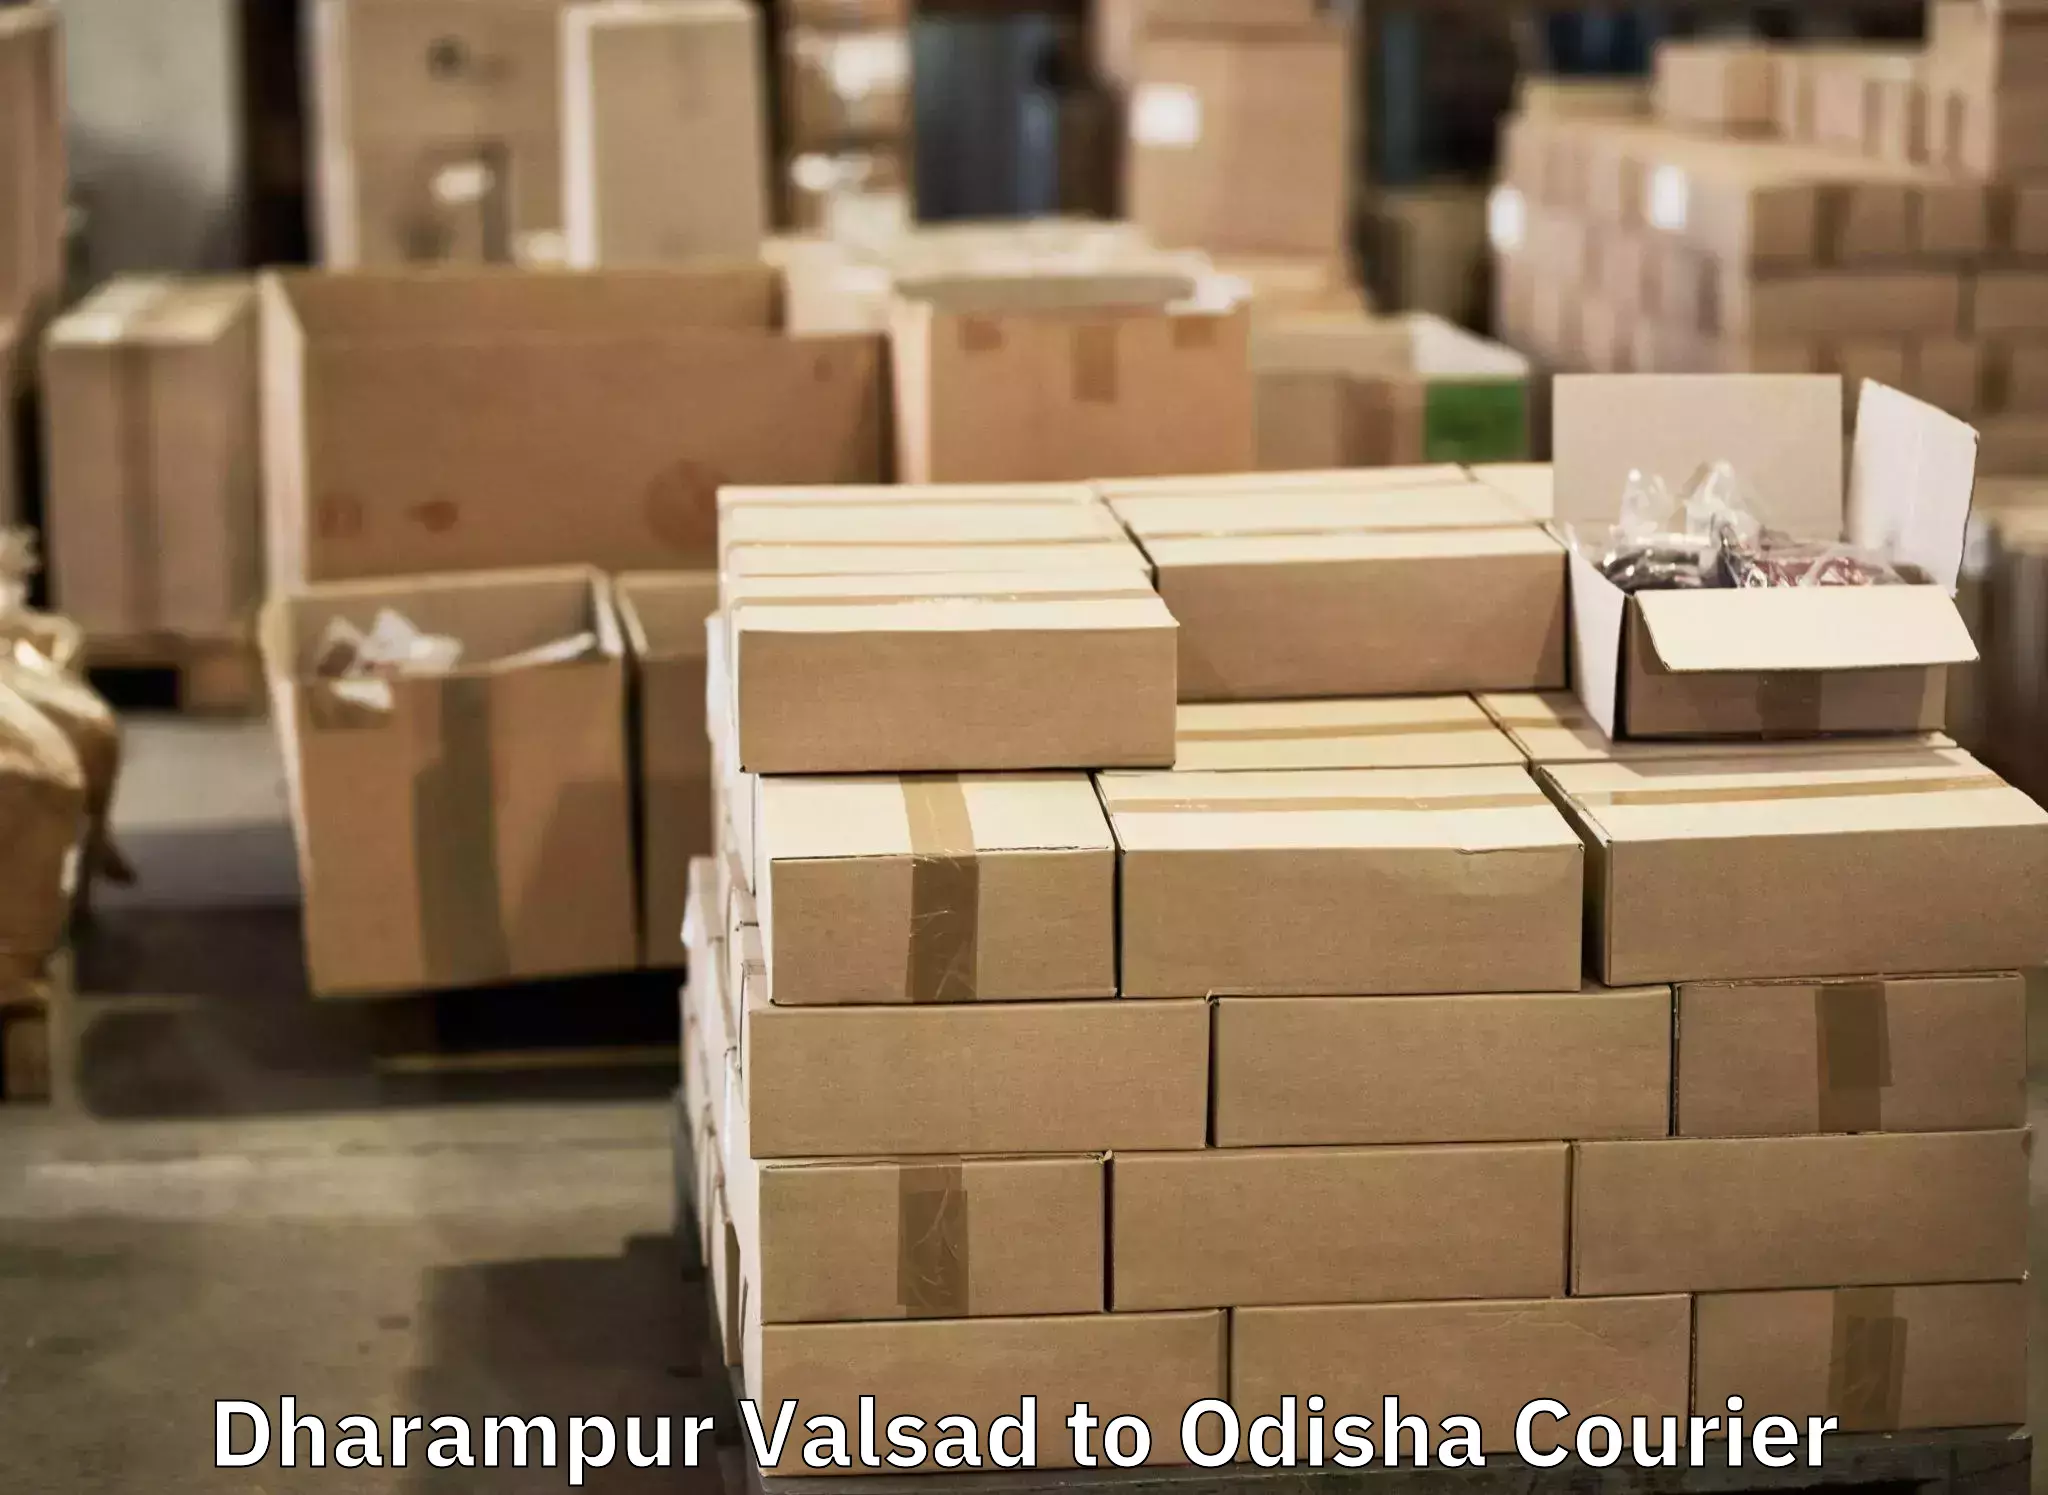 Personal effects shipping Dharampur Valsad to Baliapal